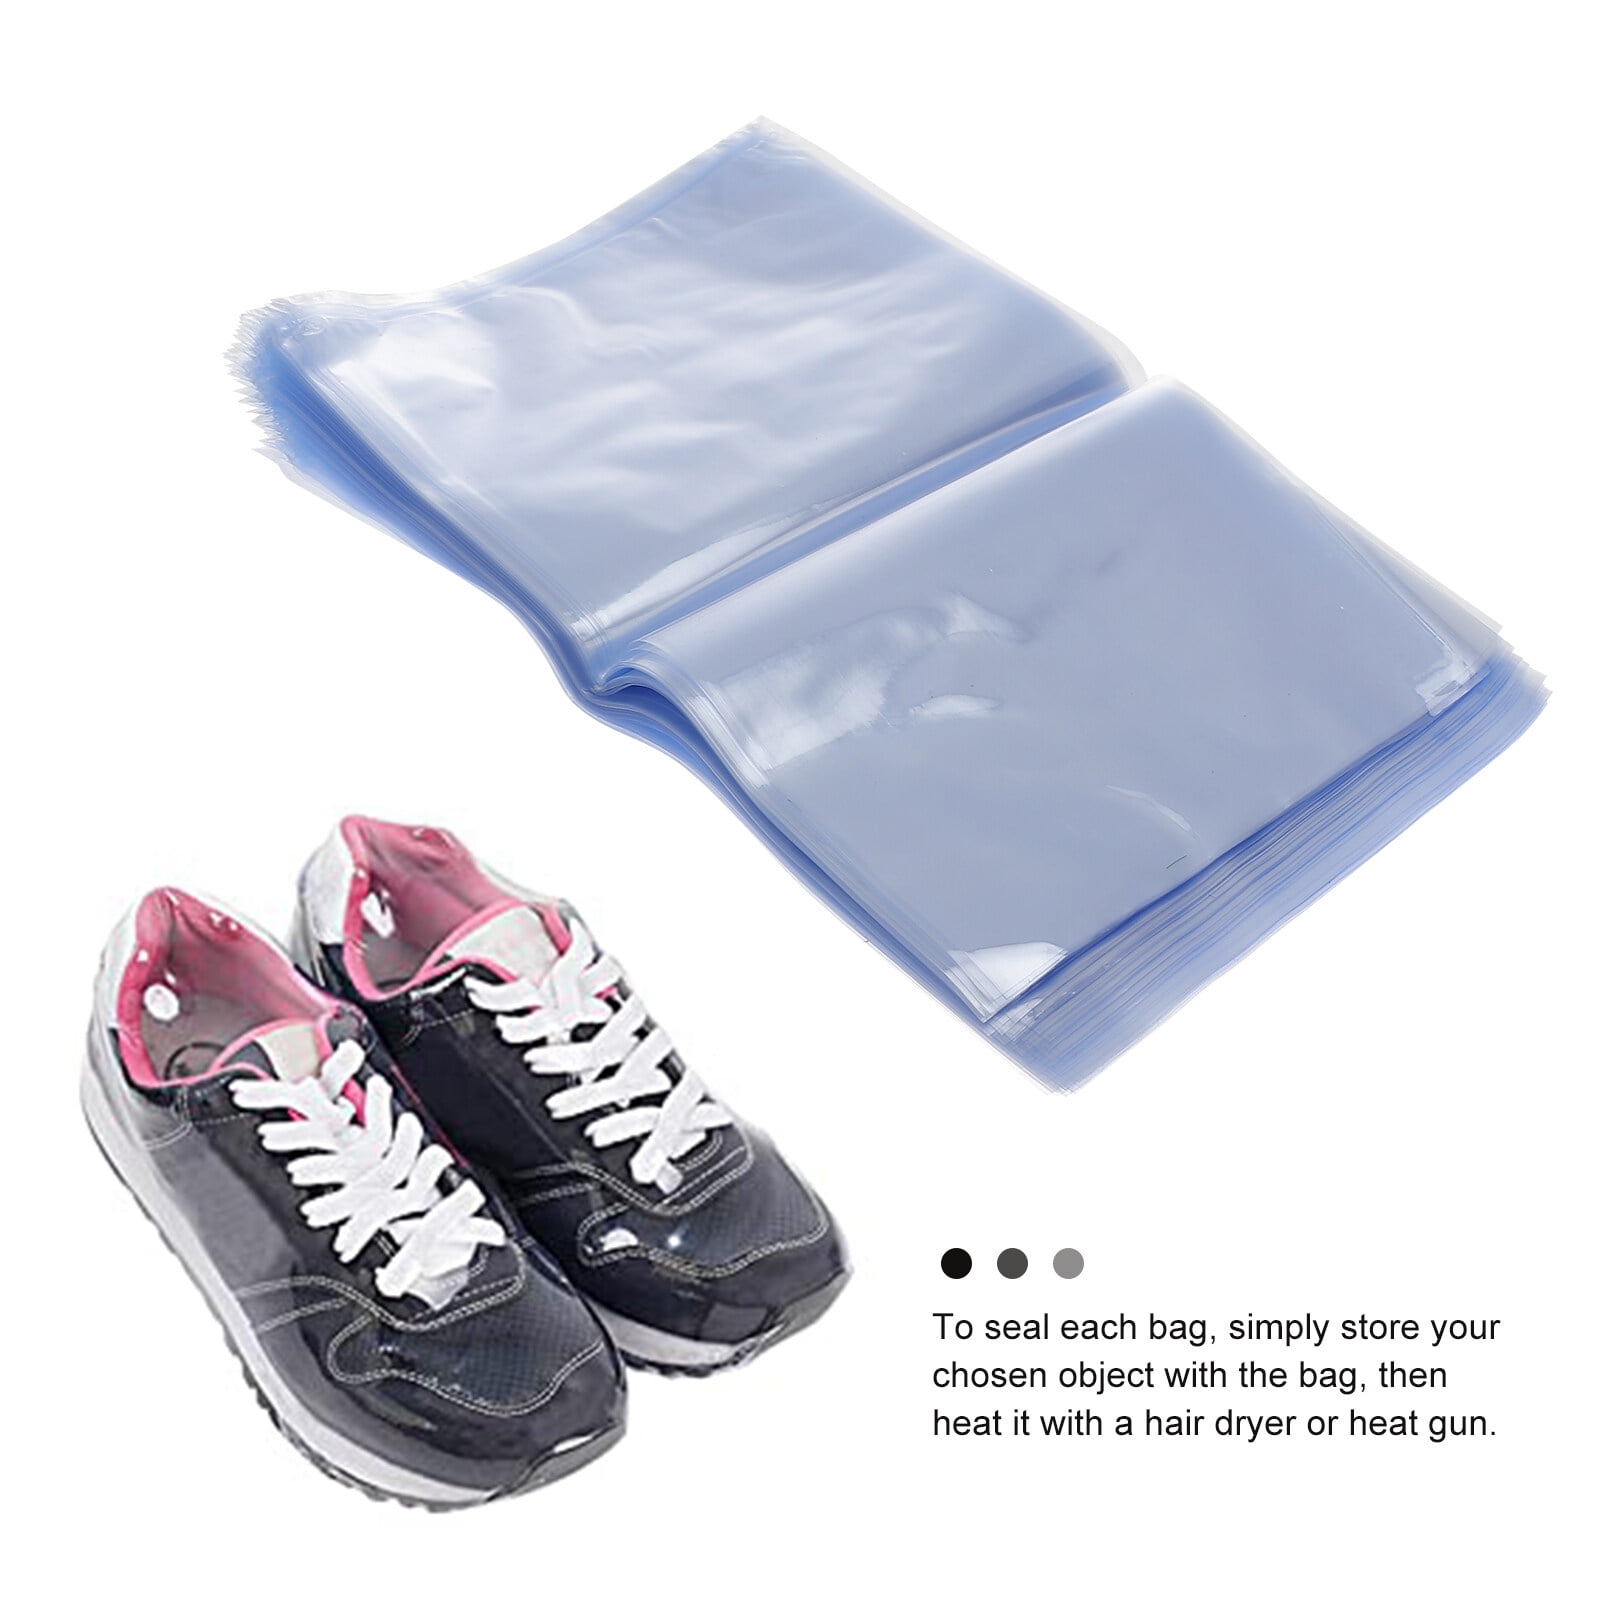 Plastic Shrink Wrap Bags for Soaps Shoes Gift Baskets – Clear Heat